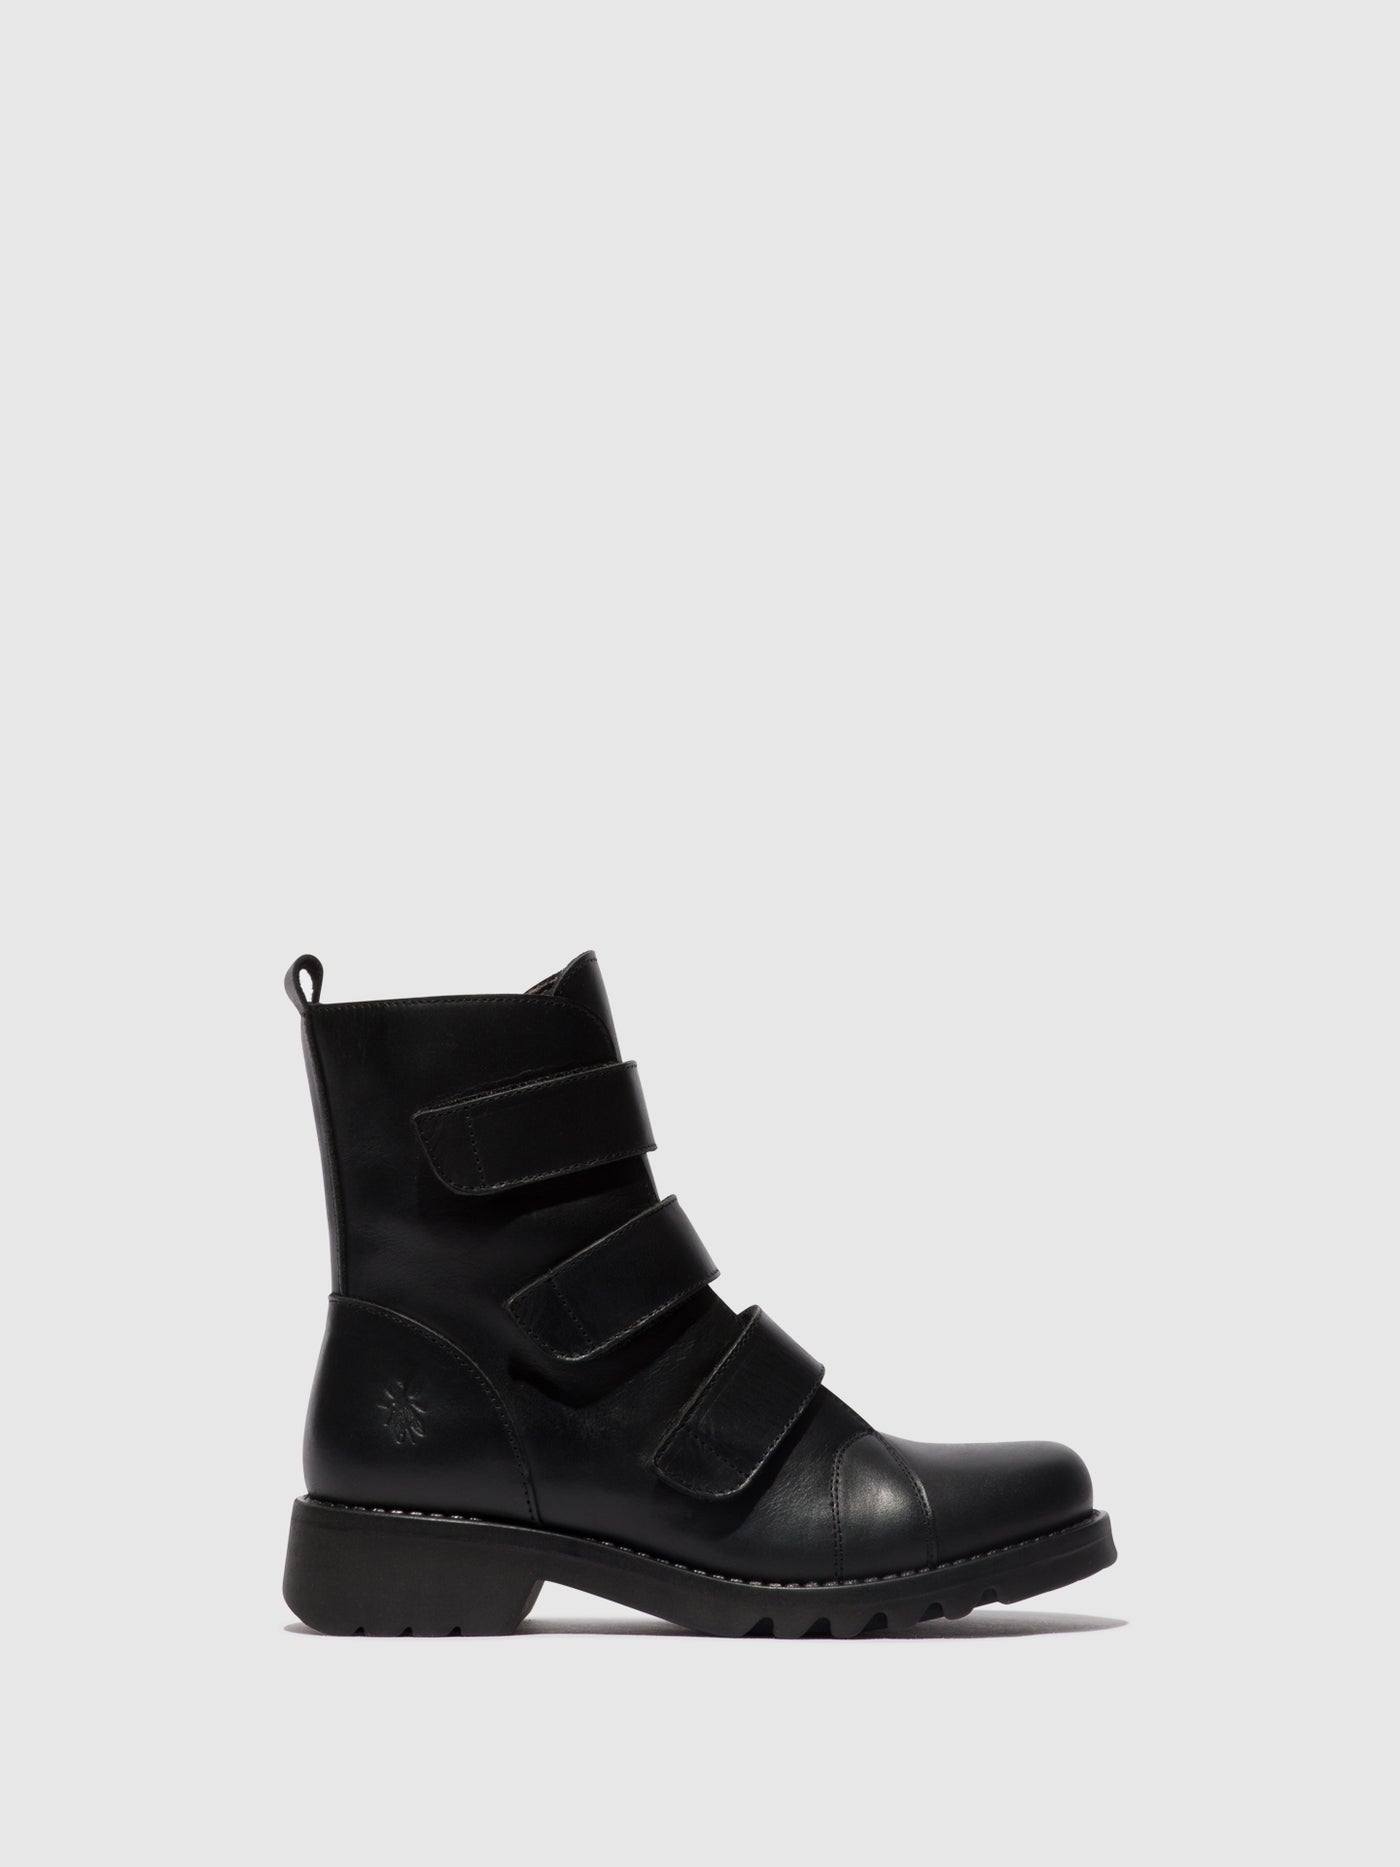 Velcro Ankle Boots RACH790FLY BLACK (ALL BLACK)